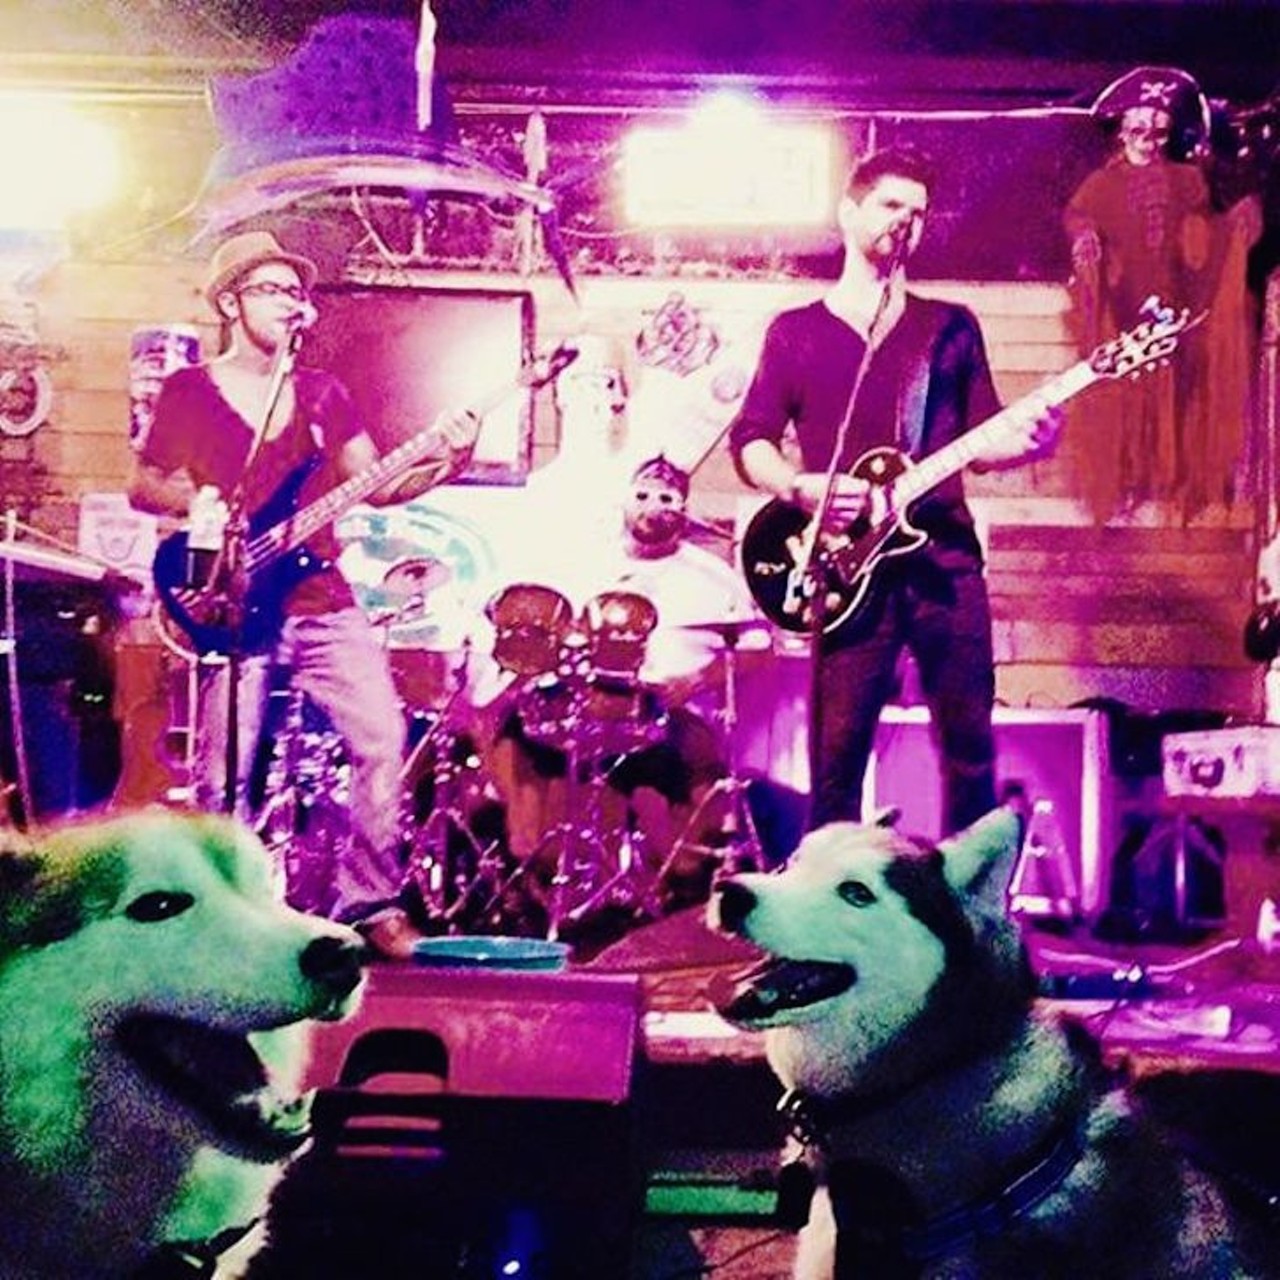 Belle Isle Yacht Pub
7521 S. Orange Ave. | 407-850-3491
Visit this neighborhood pub Tuesday through Saturday and both you and your hound are sure to find some tunes good enough to howl along with. 
Photo via belle_isle_yacht_pub/Instagram